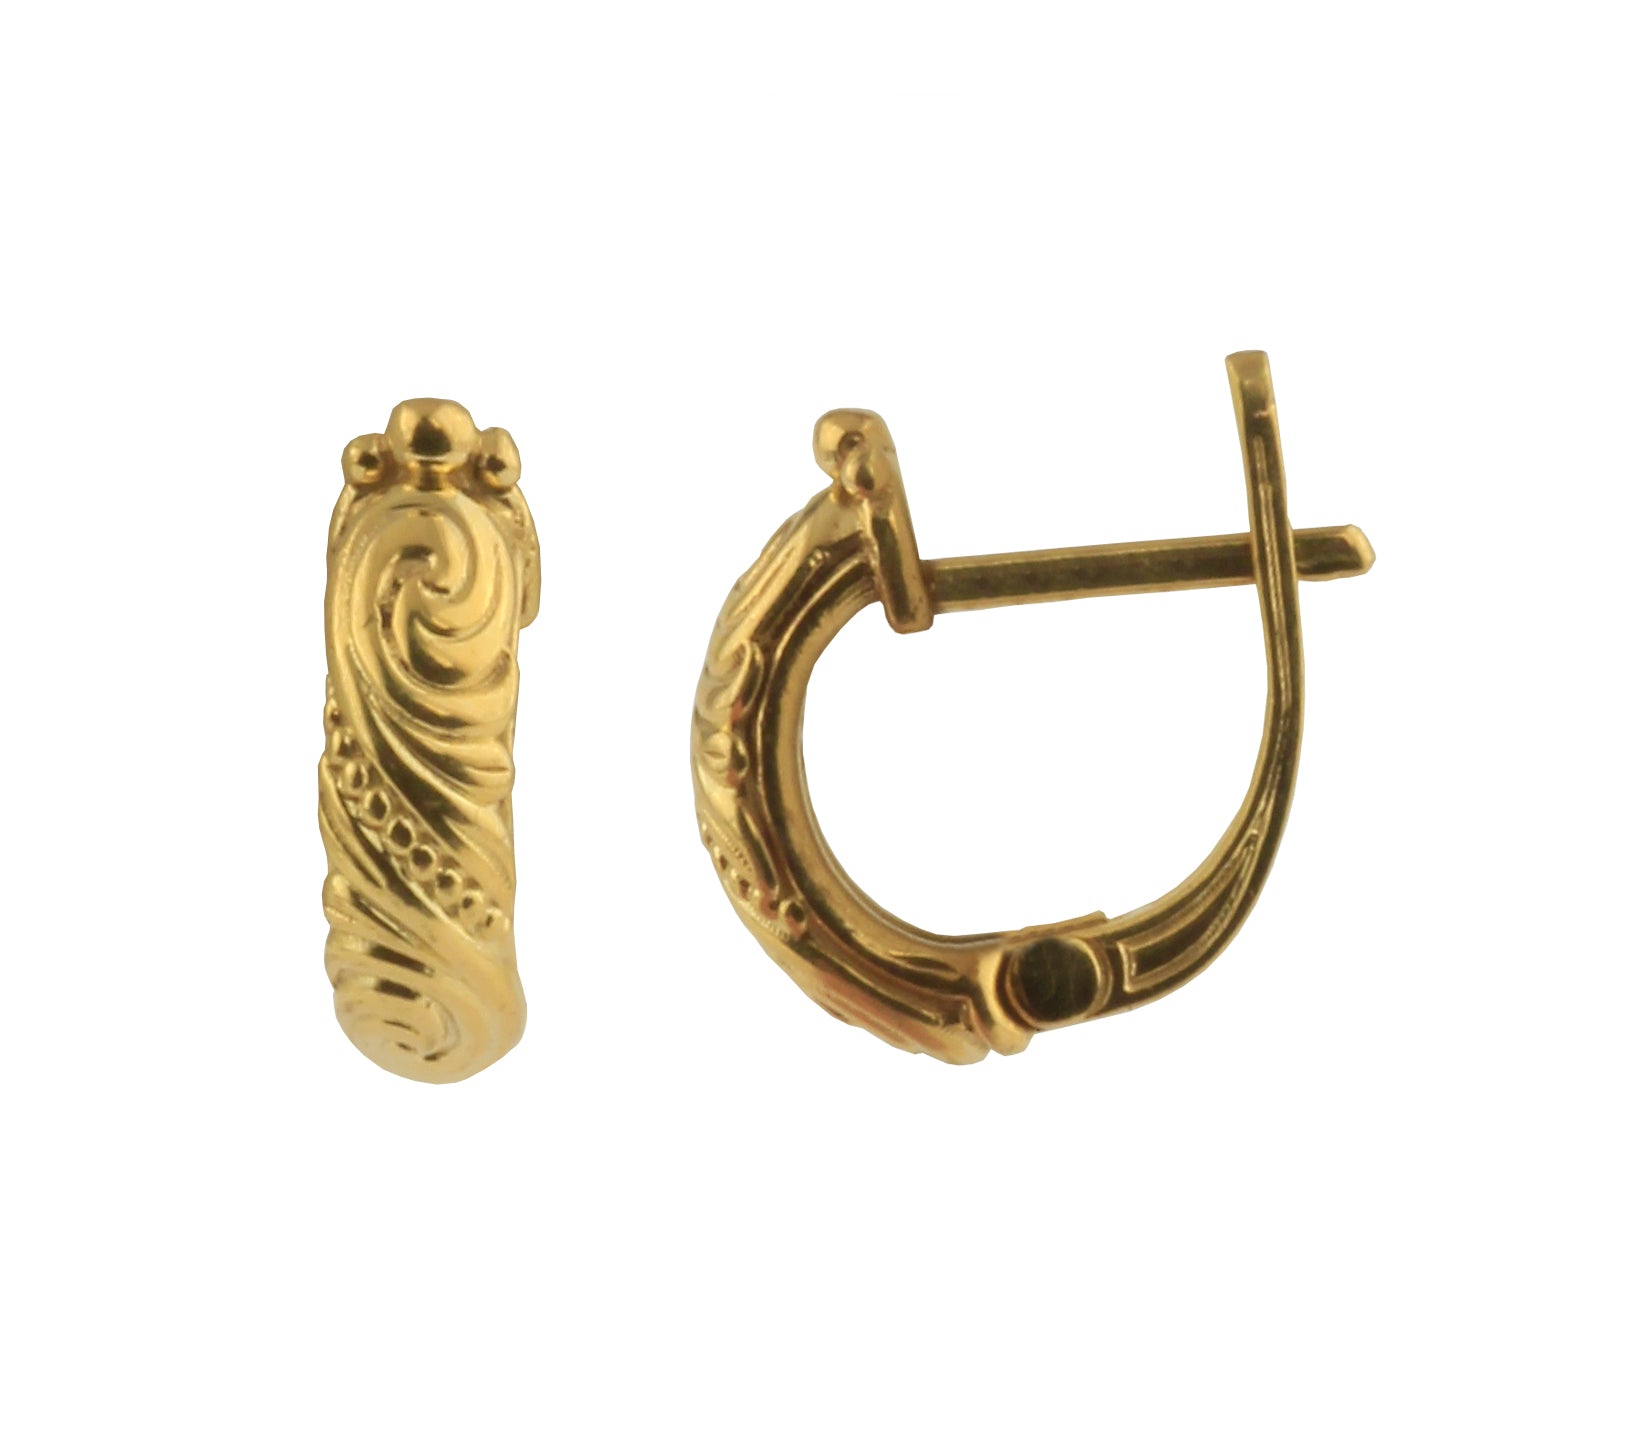 KONSTANTINO 18KT GOLD (2.97GR +/-)  EARRINGS FROM THE FLAMENCO GOLD  COLLECTION